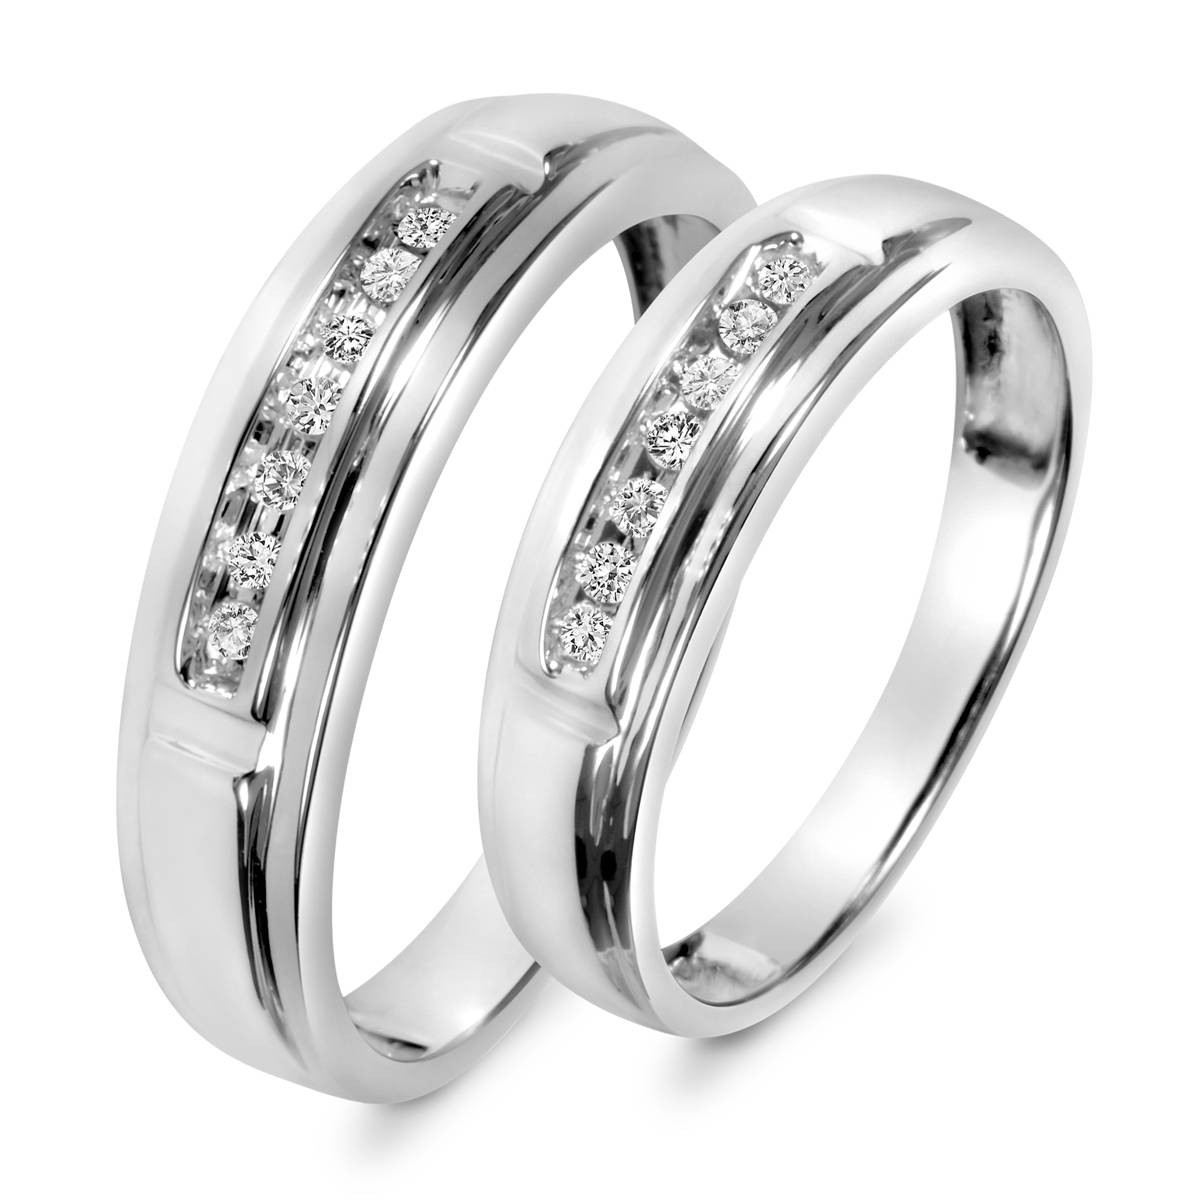 Matching Wedding Ring Sets His And Hers
 15 Inspirations of Matching Wedding Bands Sets For His And Her